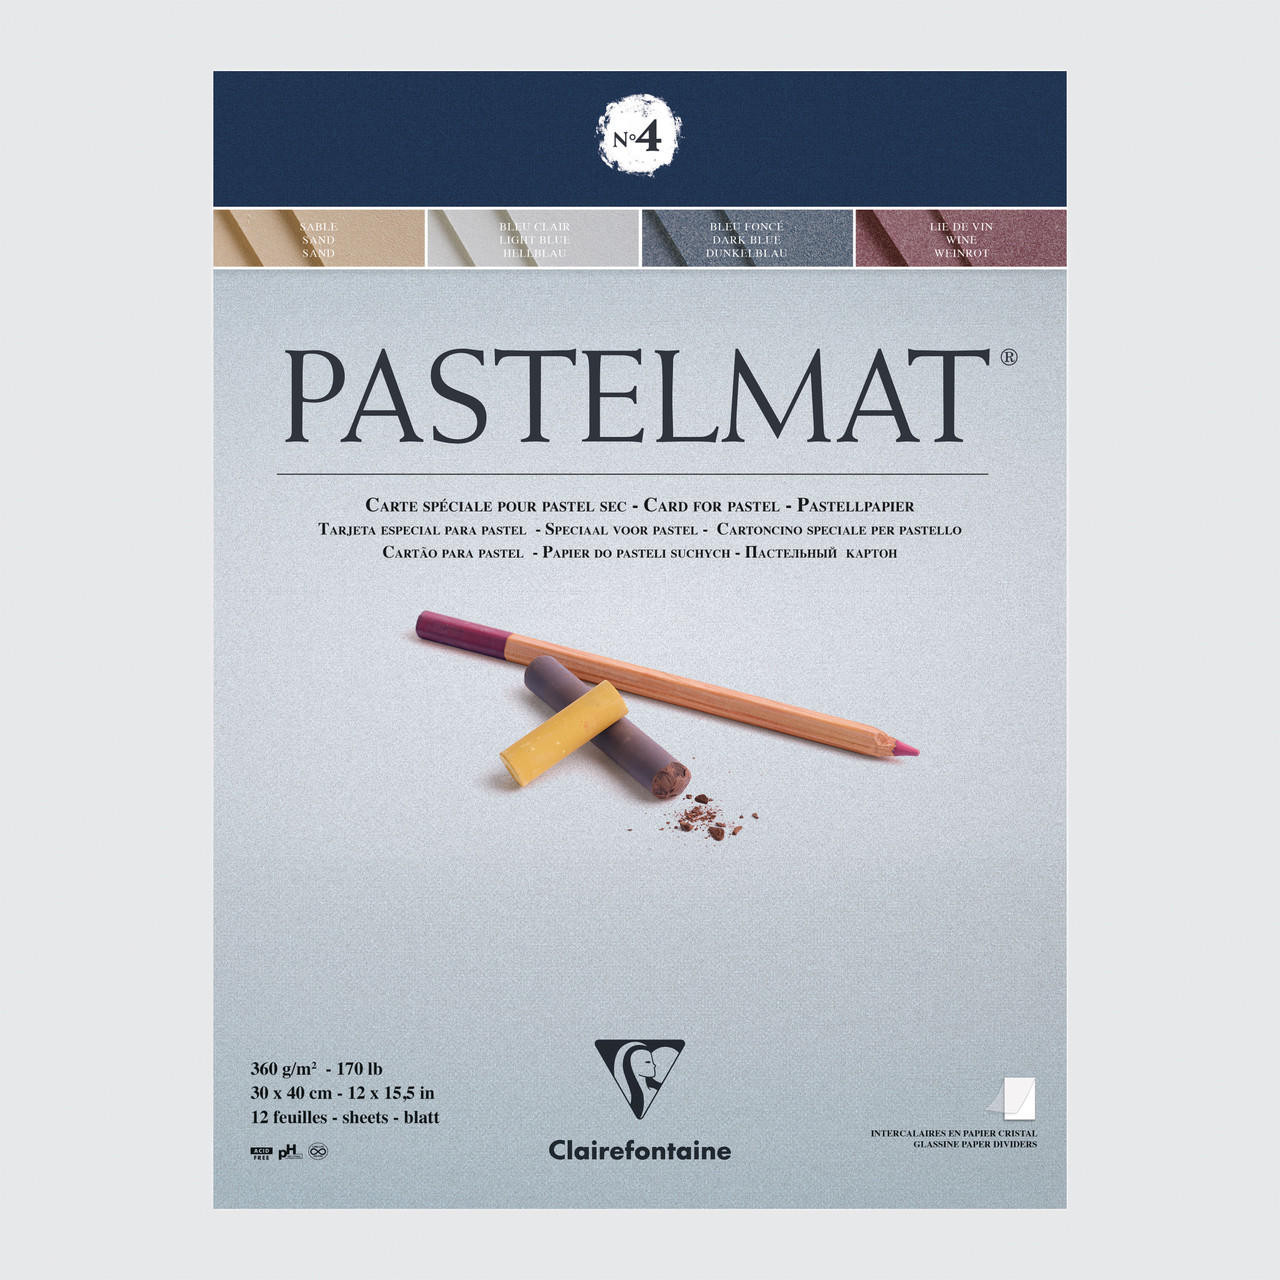 Clairefontaine Pastelmat Pad No. 4 360g 12 sheets 30 x 40cm Assorted Colours